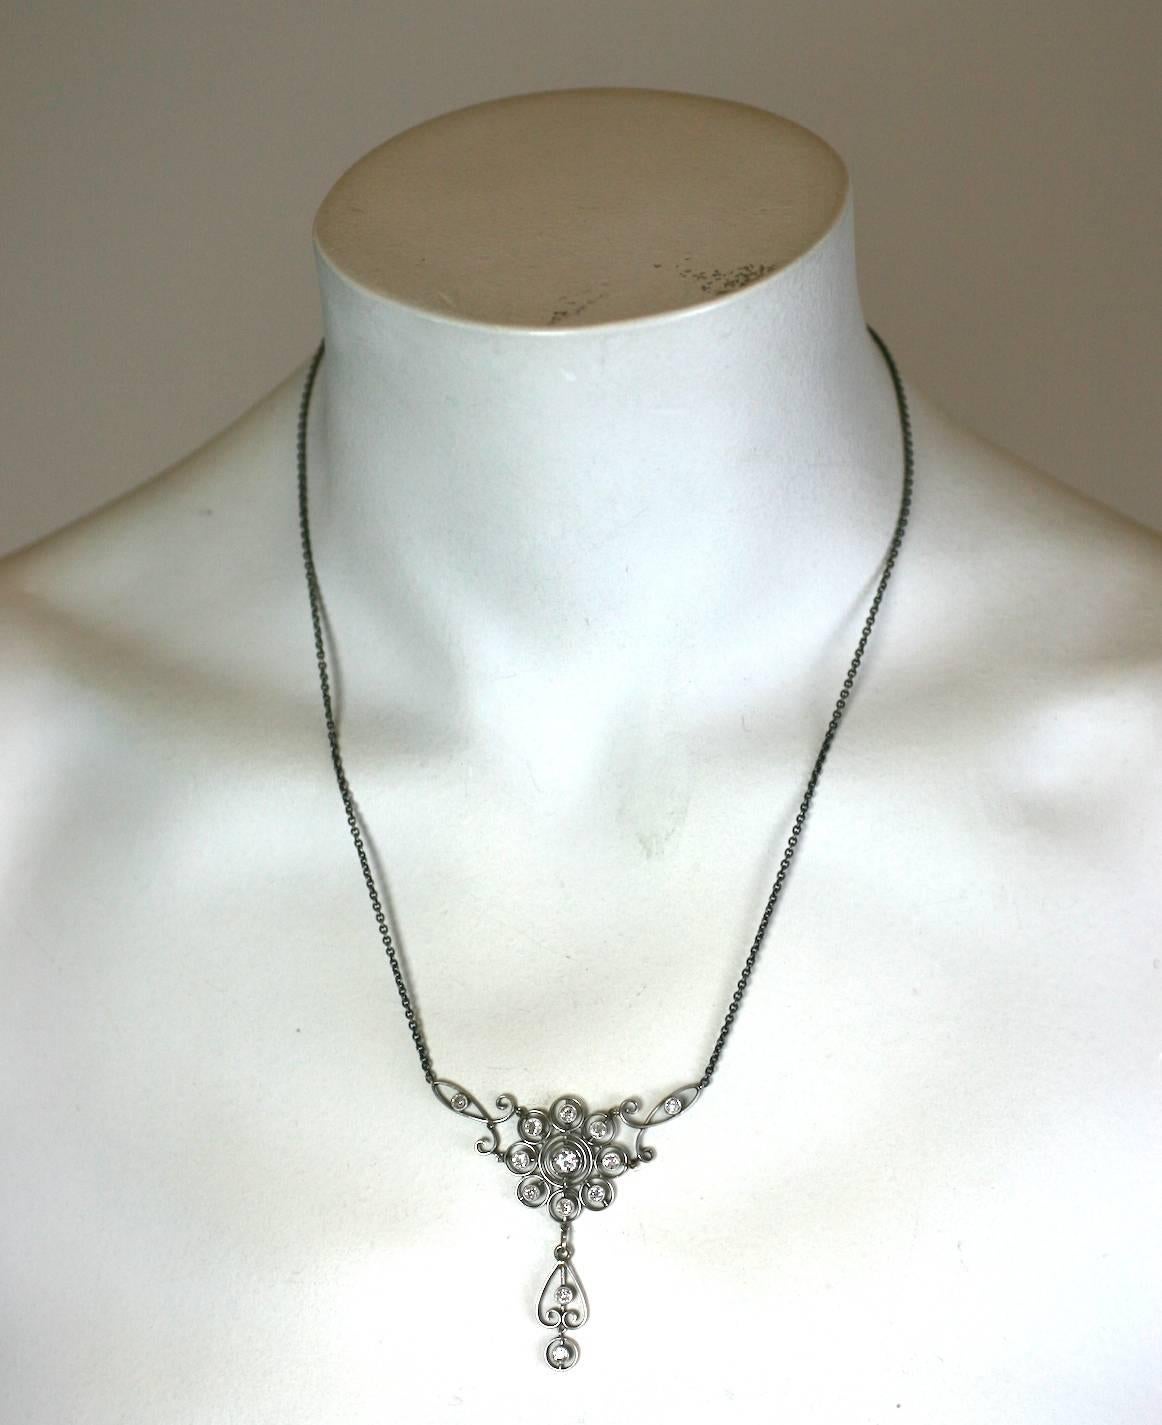 Edwardian Diamond Pendant Necklace In Excellent Condition For Sale In Riverdale, NY